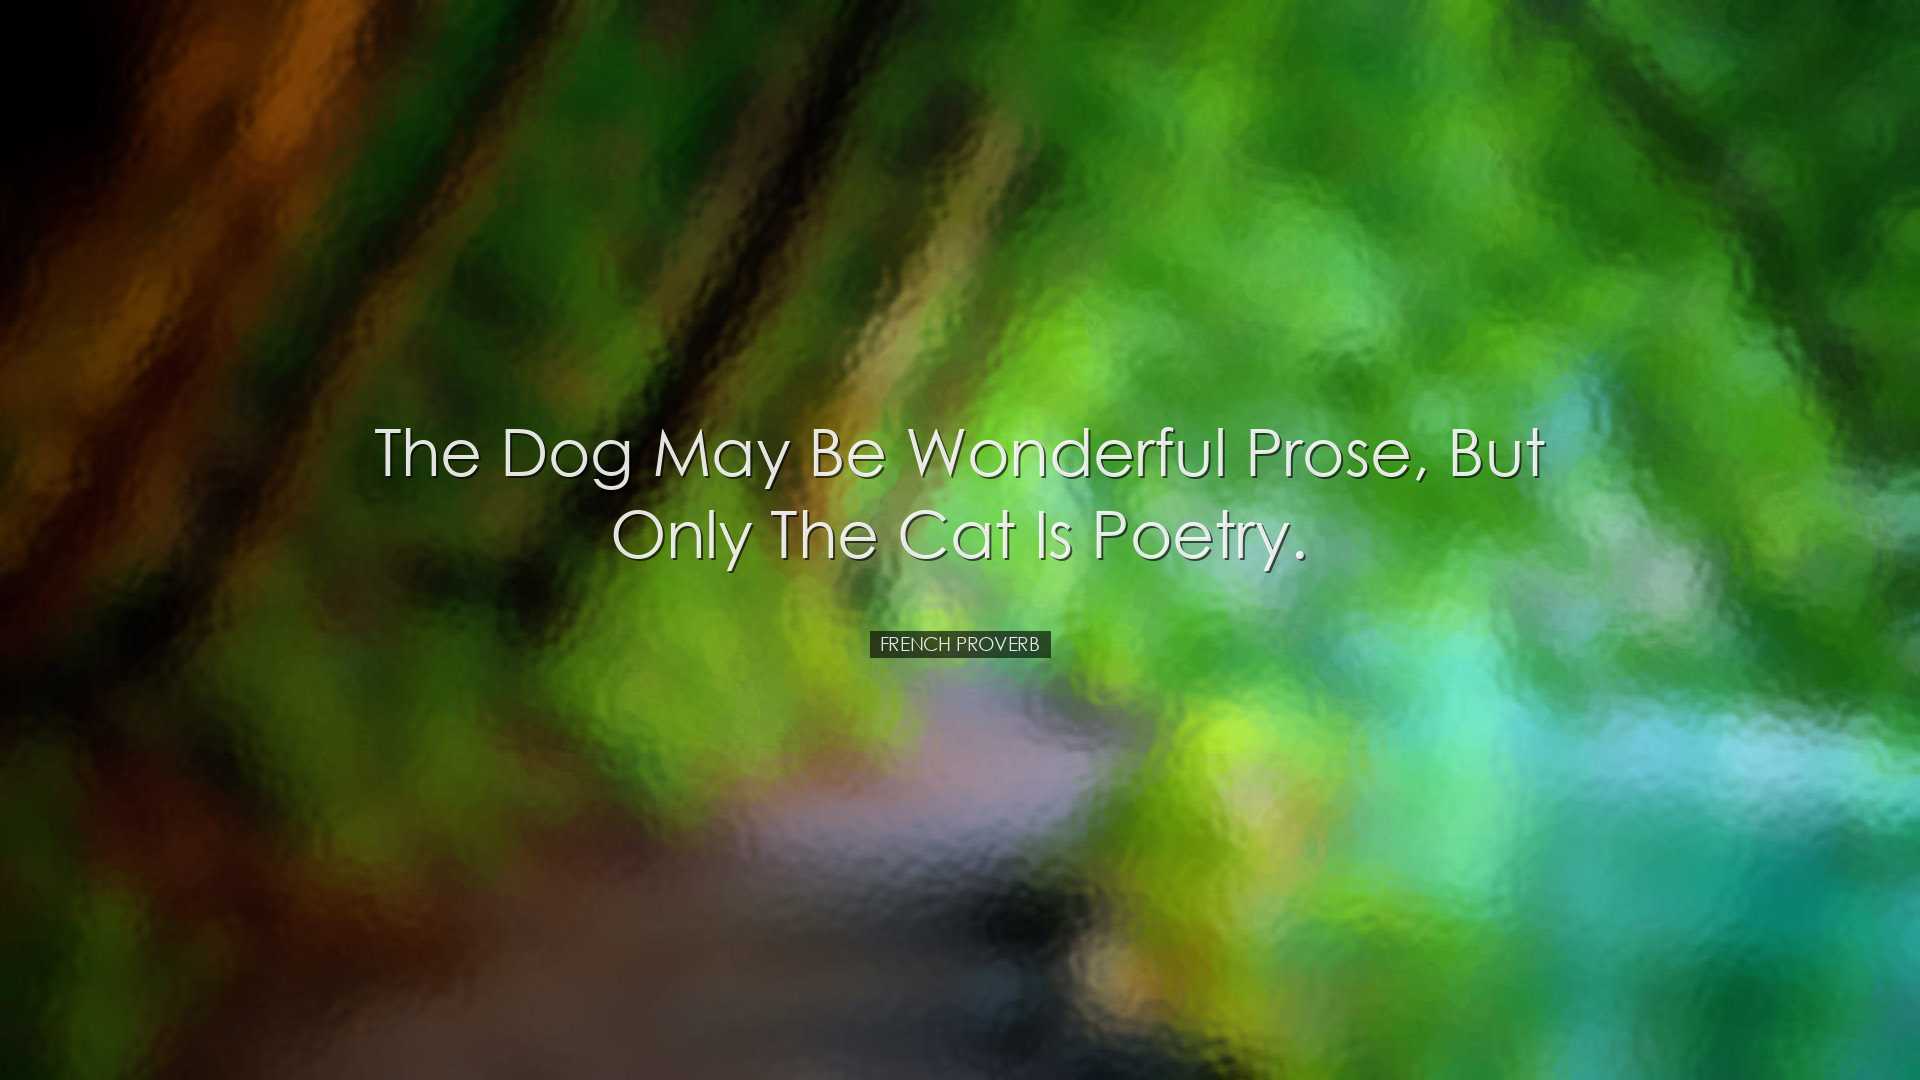 The dog may be wonderful prose, but only the cat is poetry. - Fren